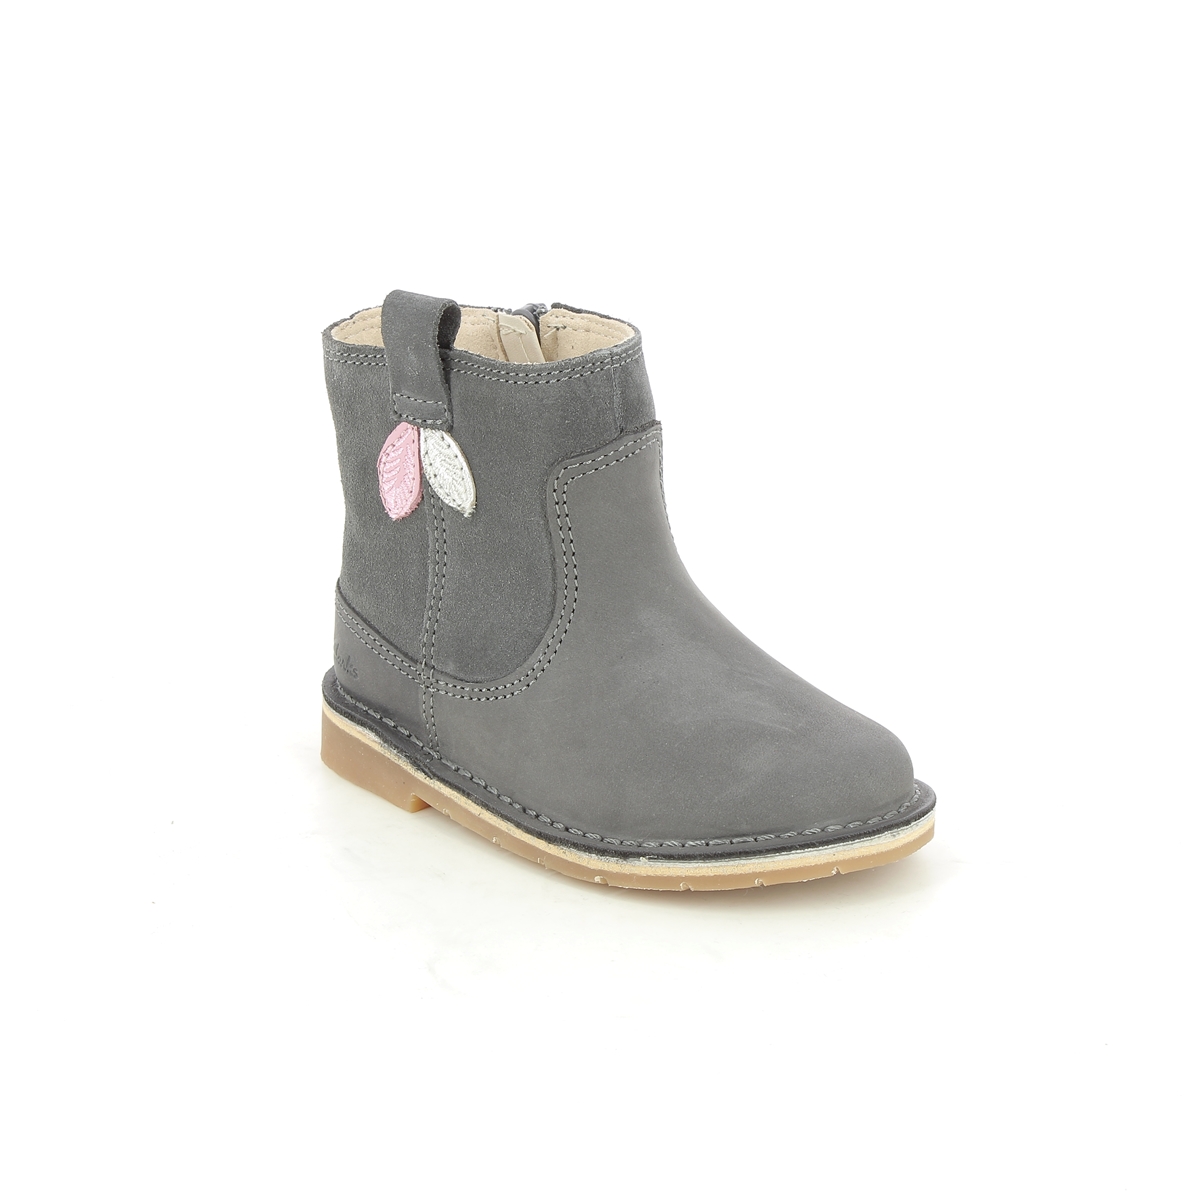 Clarks Comet Style T Grey Leather Kids Toddler Girls Boots 619426F In Size 8.5 In Plain Grey Leather F Width Fitting Regular Fit For kids